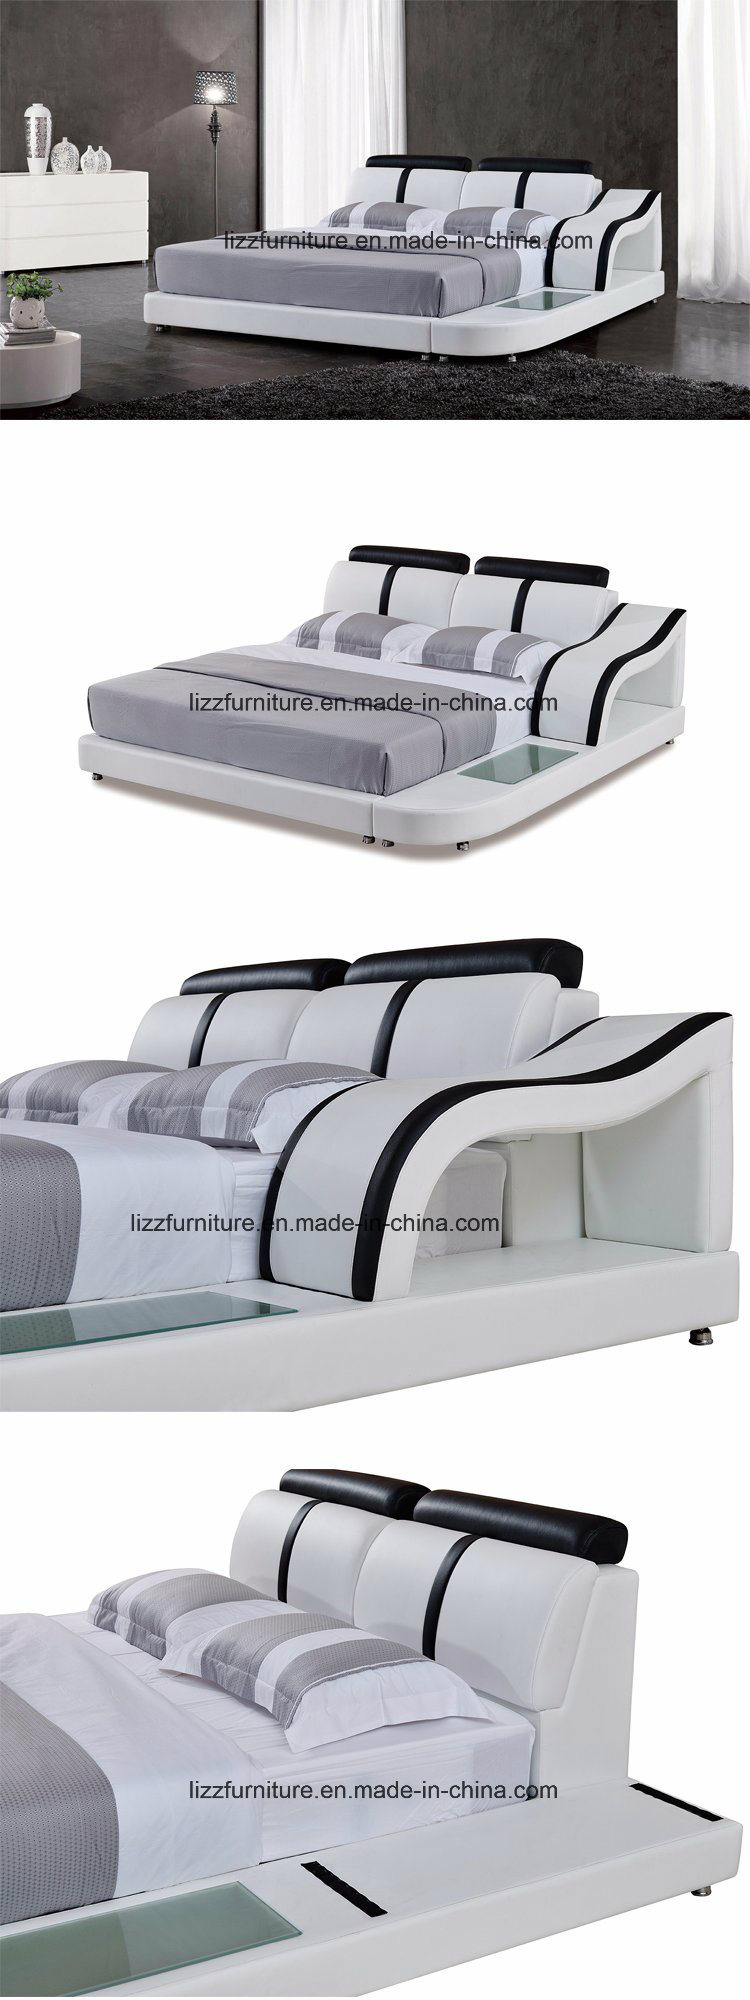 Convenient Adjustable Head Leather Bed